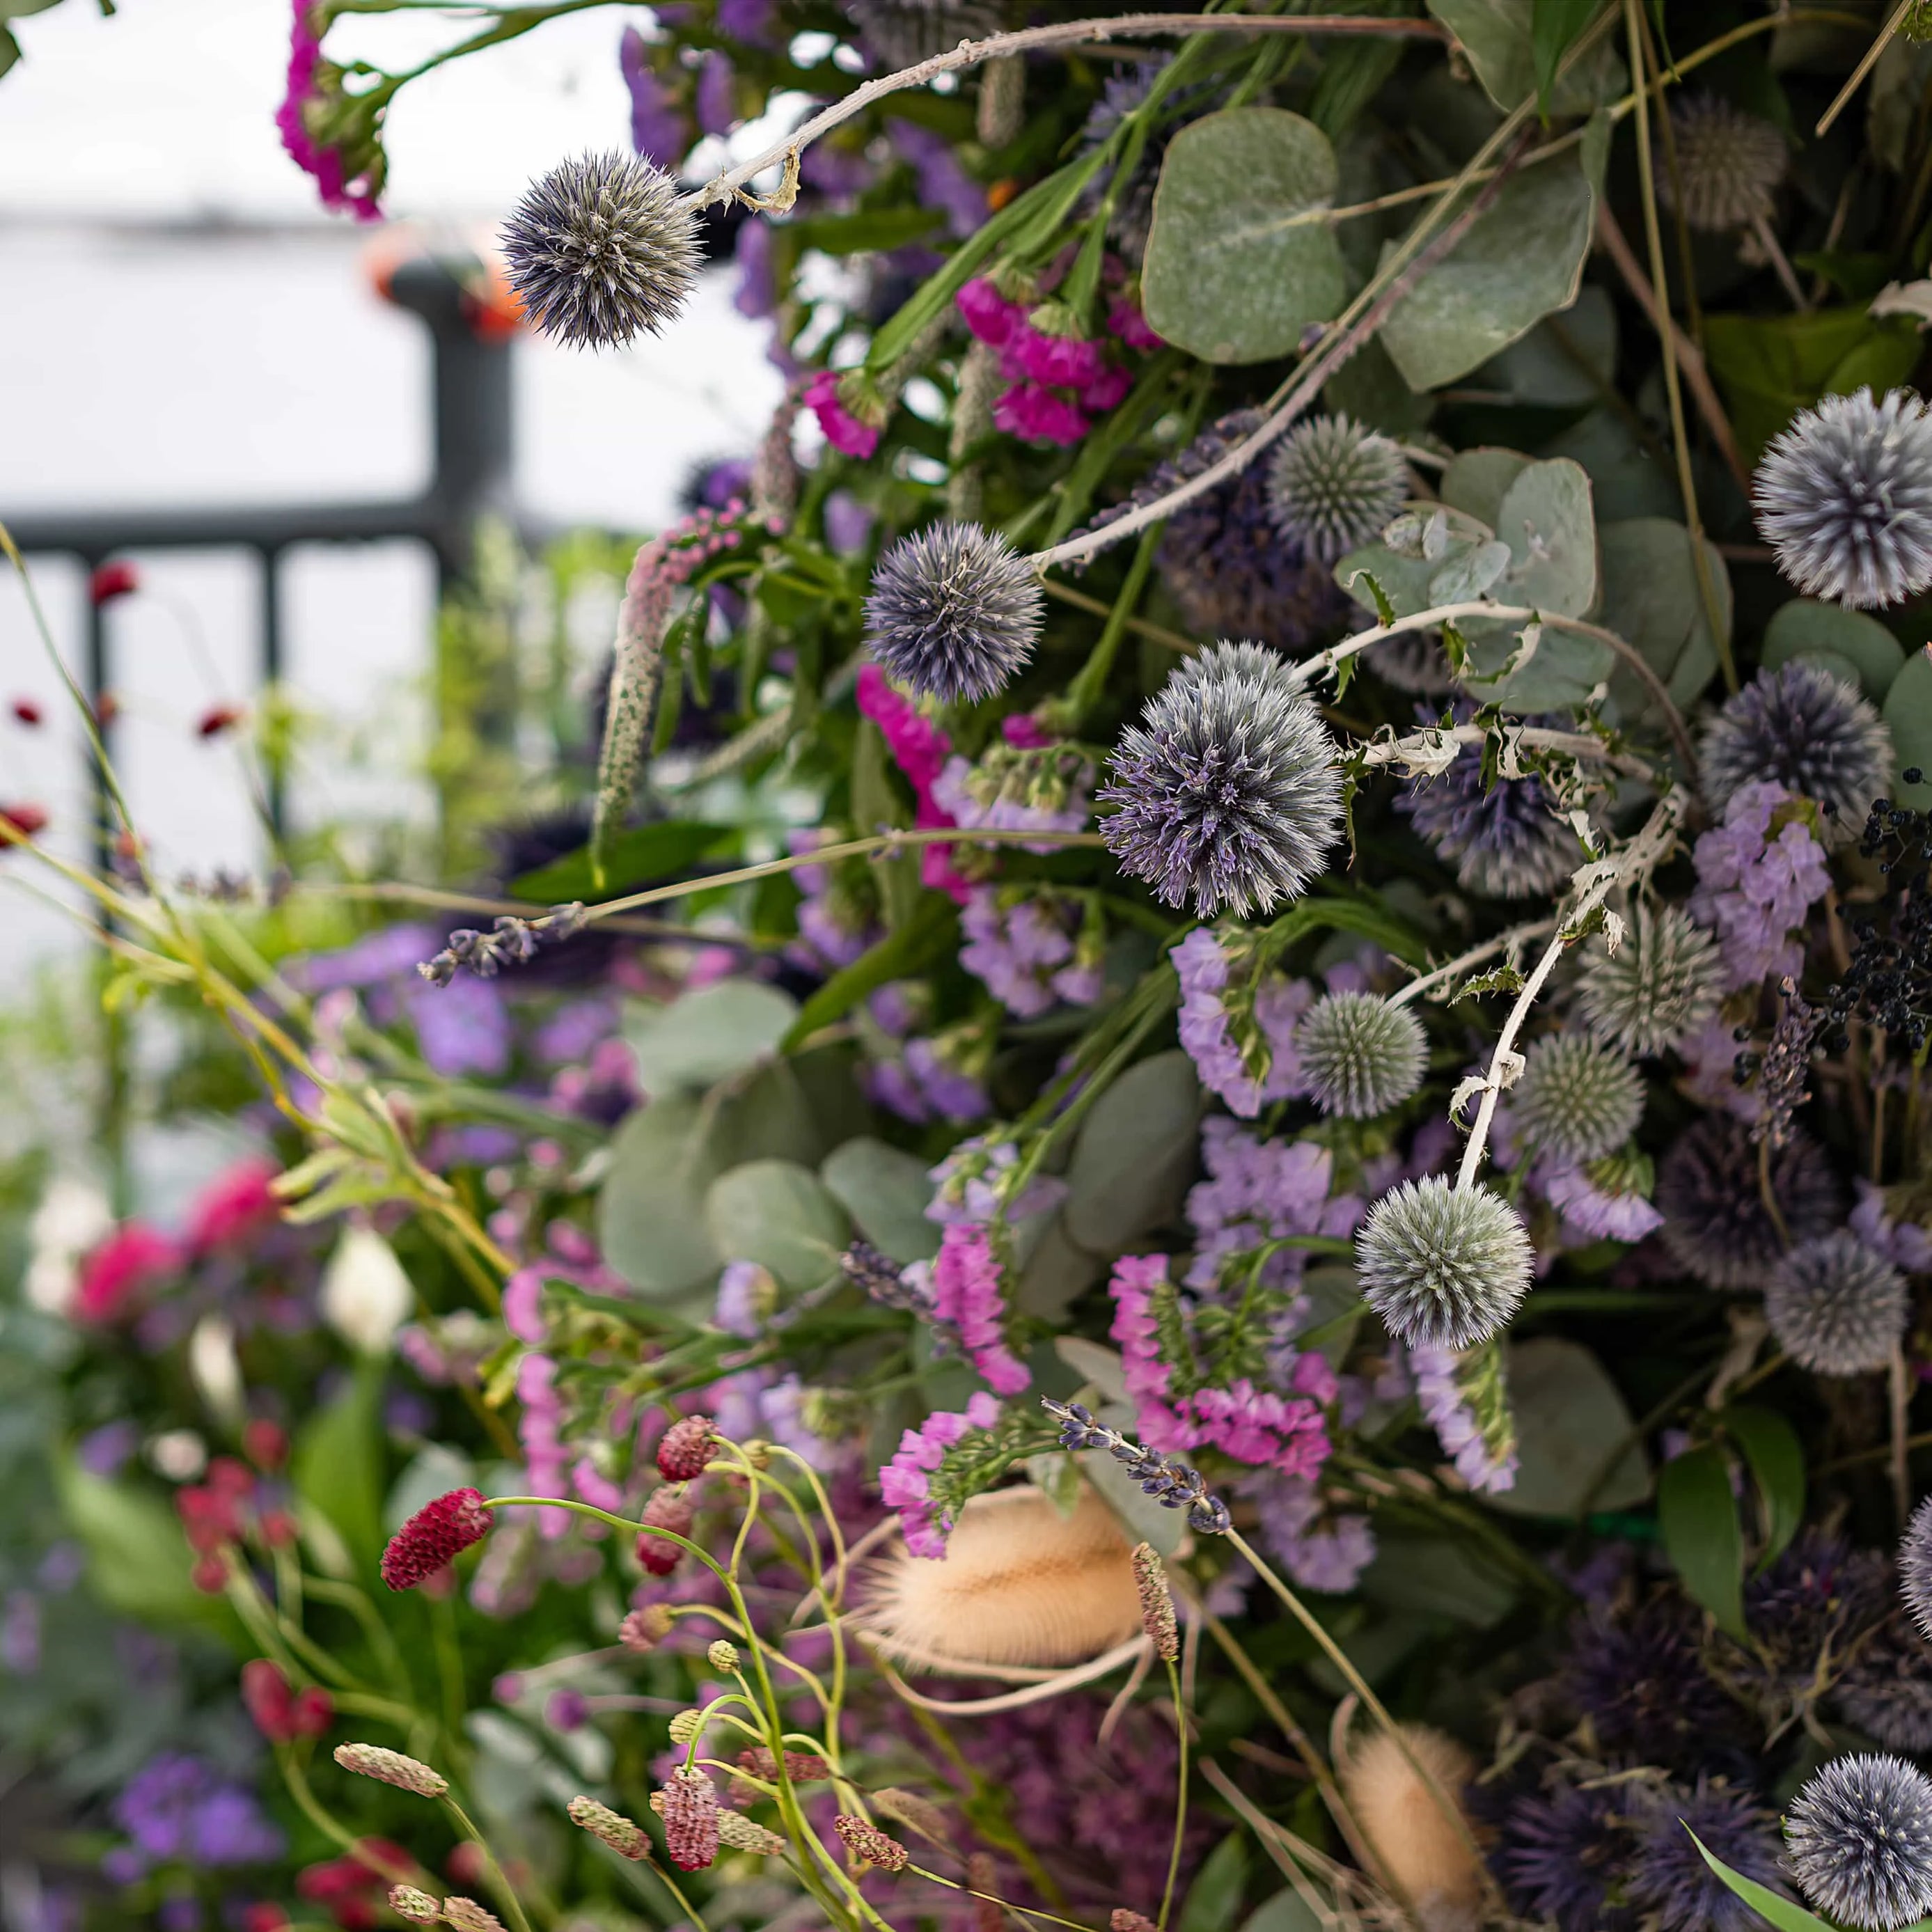 This is a close-up of a rich and colourful floral arrangement at the Formula E event. It features spherical purple thistles, delicate pink blooms, and textured foliage, artistically assembled to evoke a sense of natural beauty and sophistication - Amaranté London.